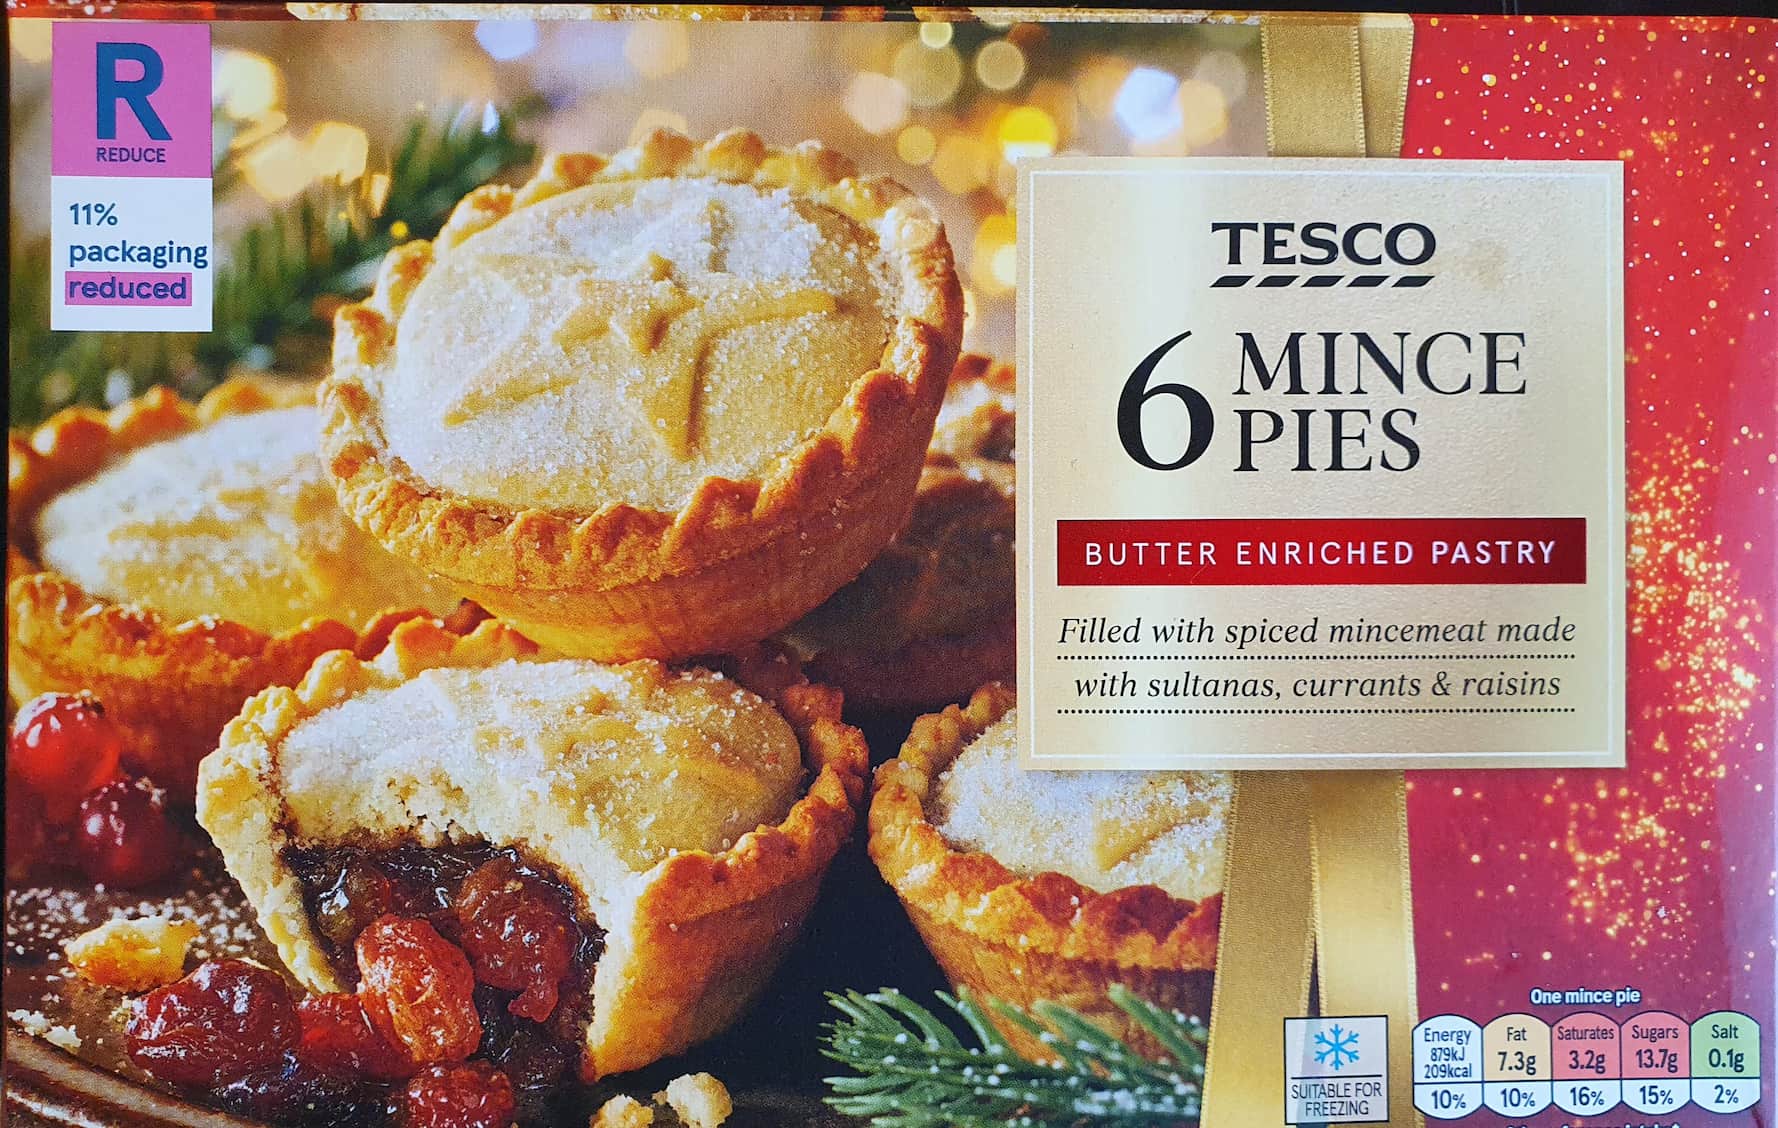 Tesco Mince Pie Review 2021